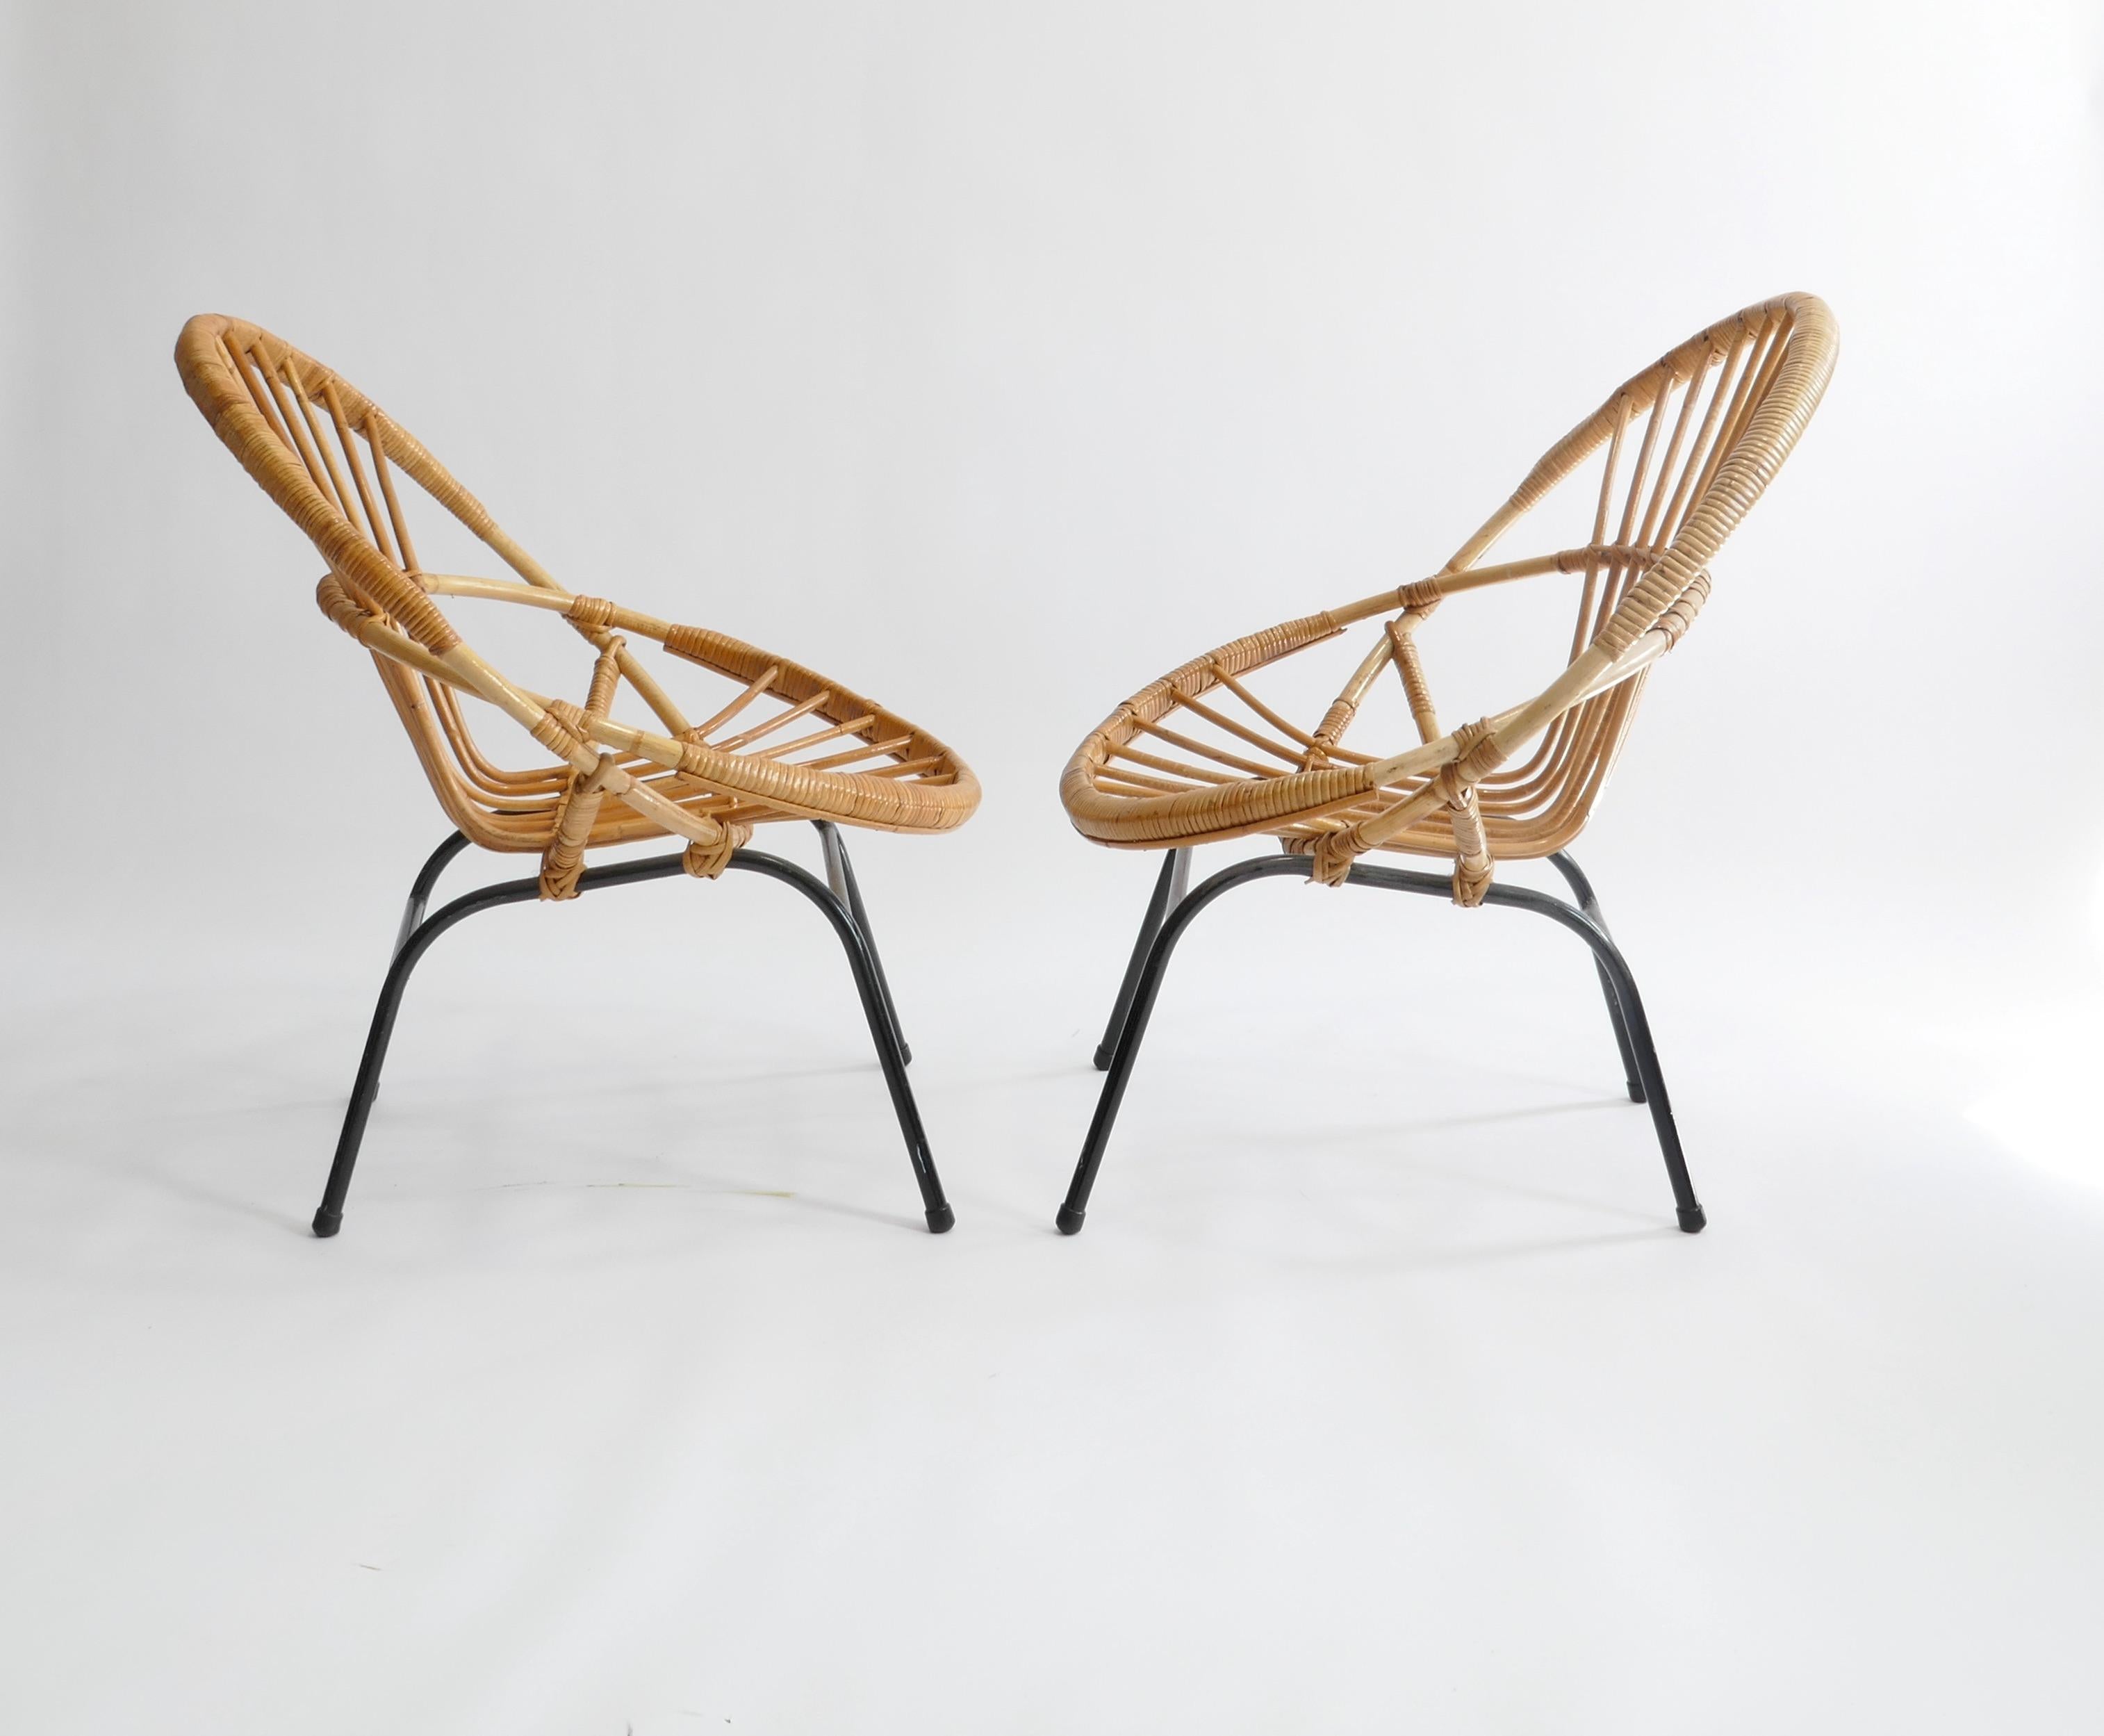 Pair of French Mid-Century Rattan Chairs, France 1950s For Sale 4